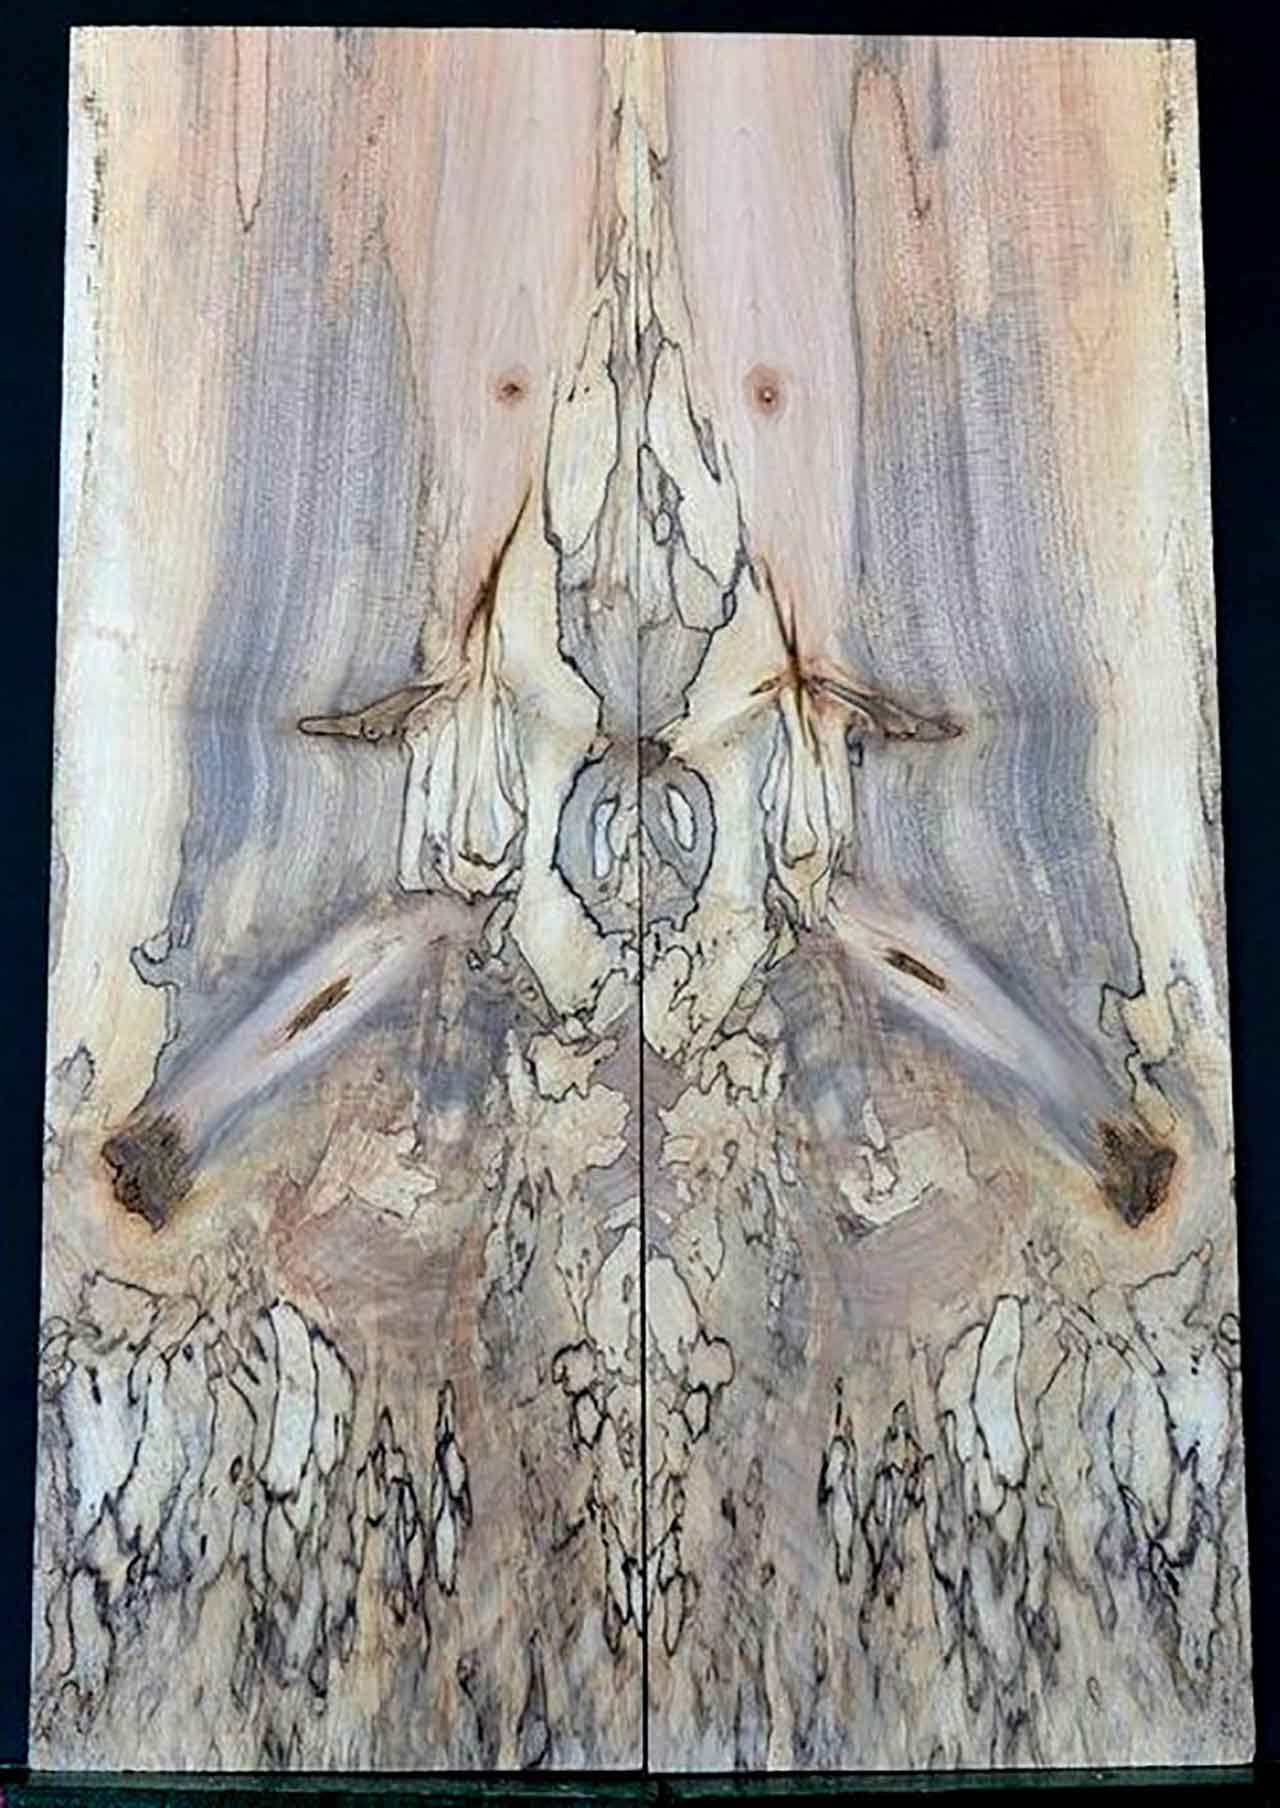 Tesla Tonewood joined Luthiers.com